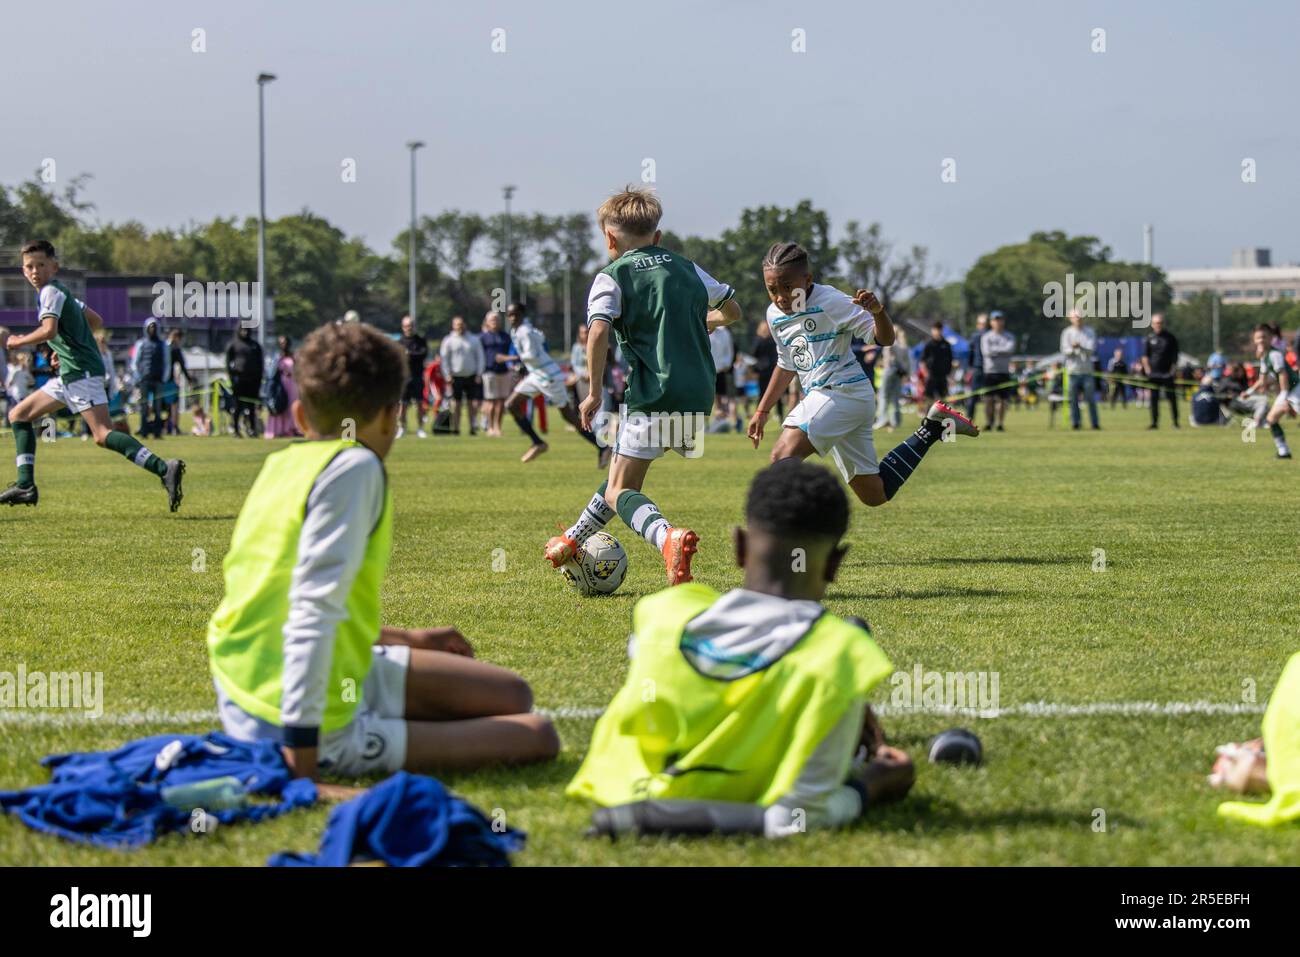 Boys playing organised grassroots football and soccer in UK on sunny day. Stock Photo